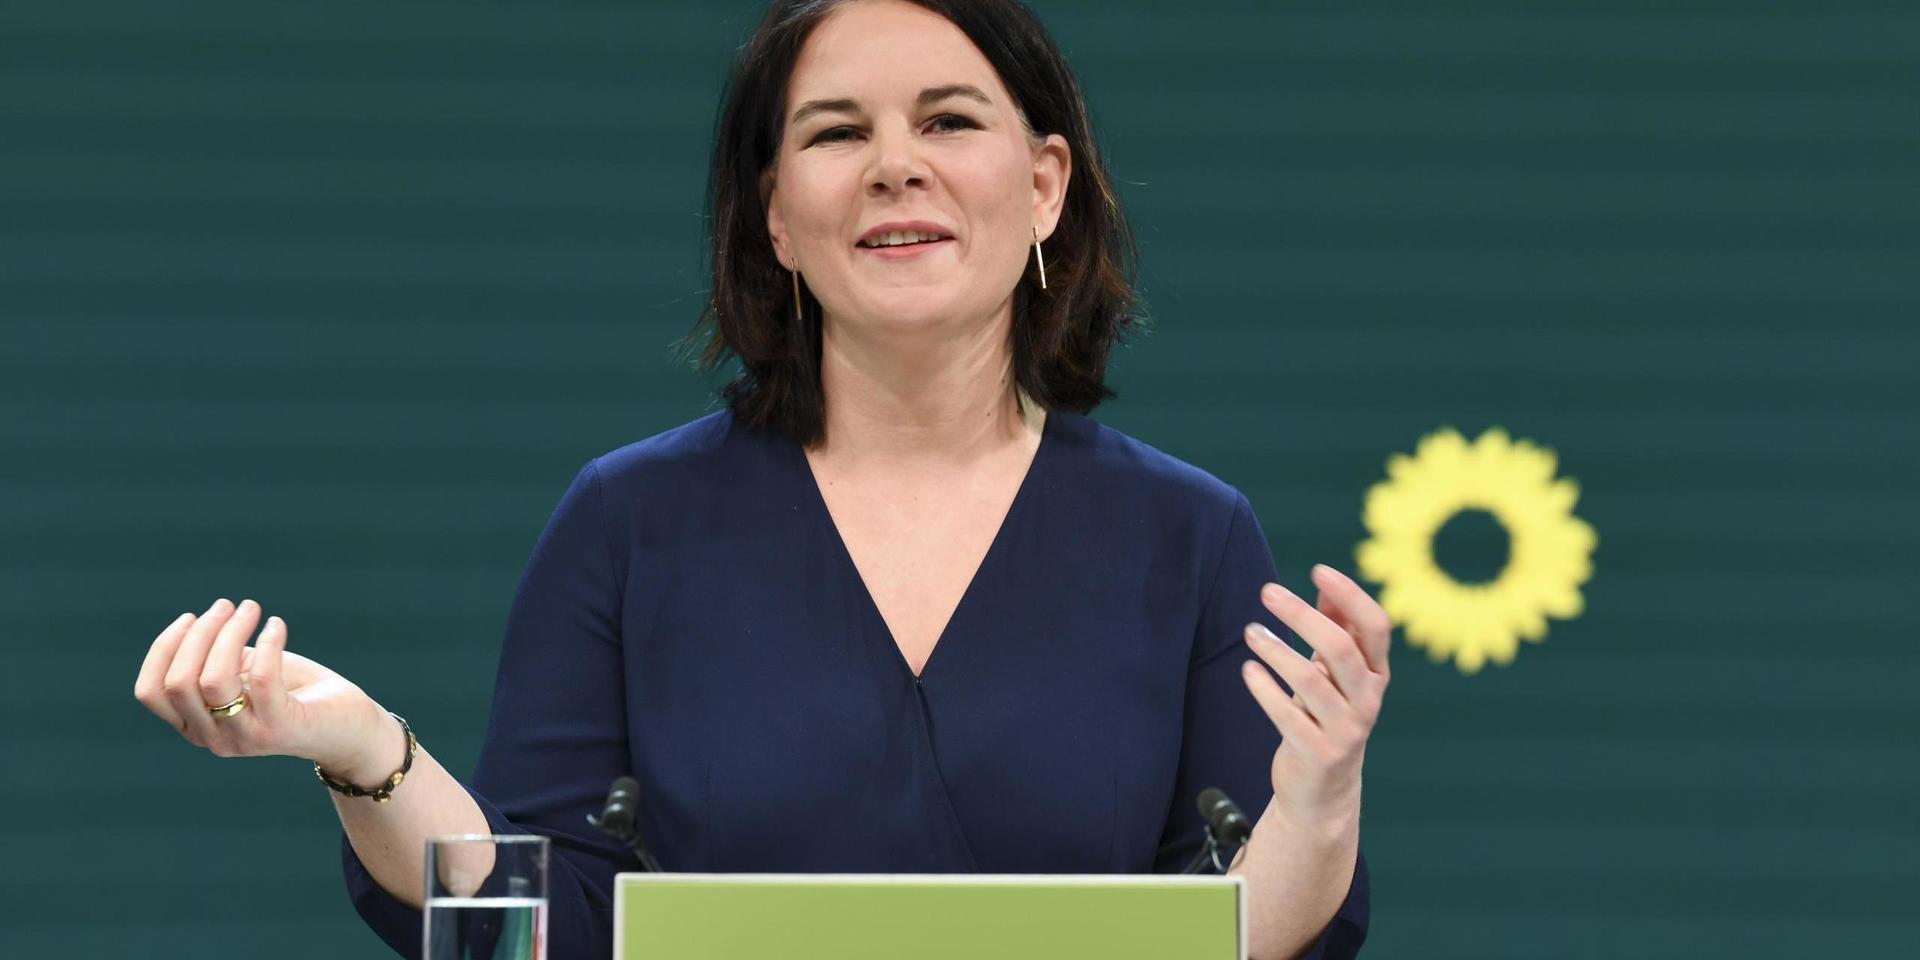 Germany's Green party co-leader Annalena Baerbock gives a speech during a digital announcement event in Berlin, Germany, where the party presented her as top candidate for chancellor for the upcoming federal election later this year, Monday, April 19, 2021. (Annegret Hilse/Pool via AP)  DMME111